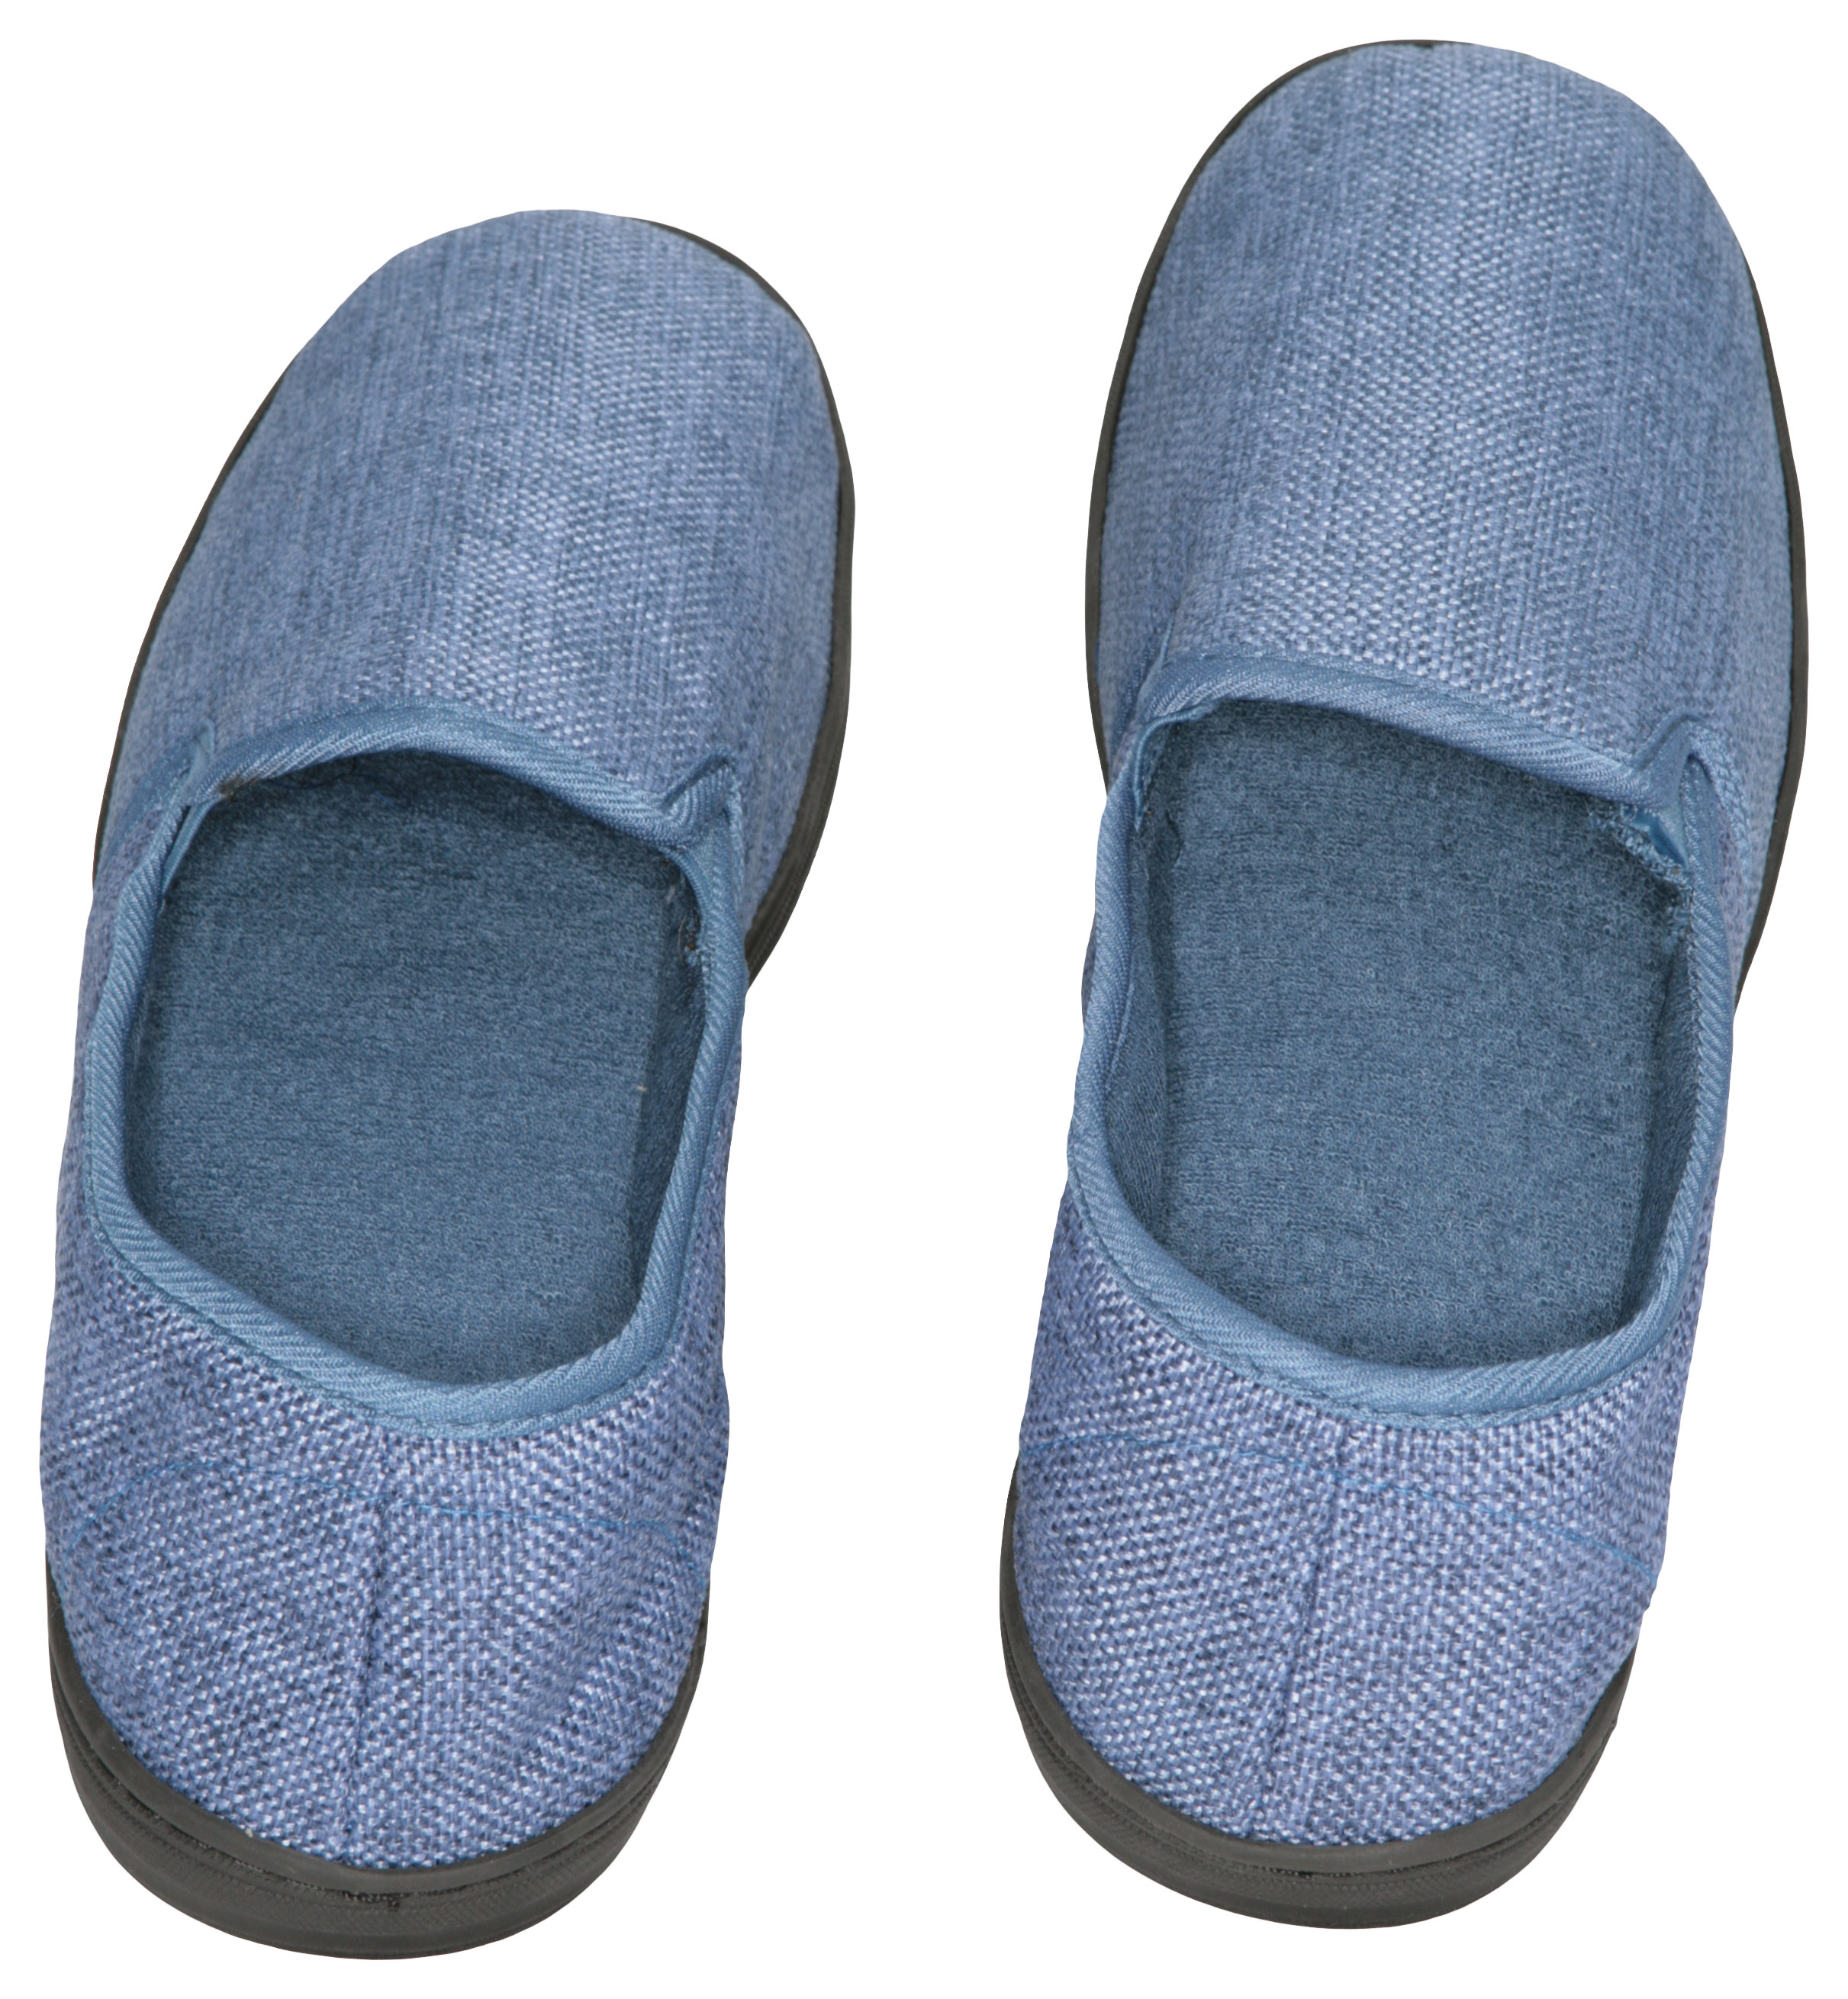 Deluxe Comfort Men's Memory Foam Slipper, Size 9-10 – Soft Linen 120D SBR Insole and Rubber Outsole – Pure Suede Shoes – Non-Marking Sole – Men's Slippers, Blue - image 4 of 5